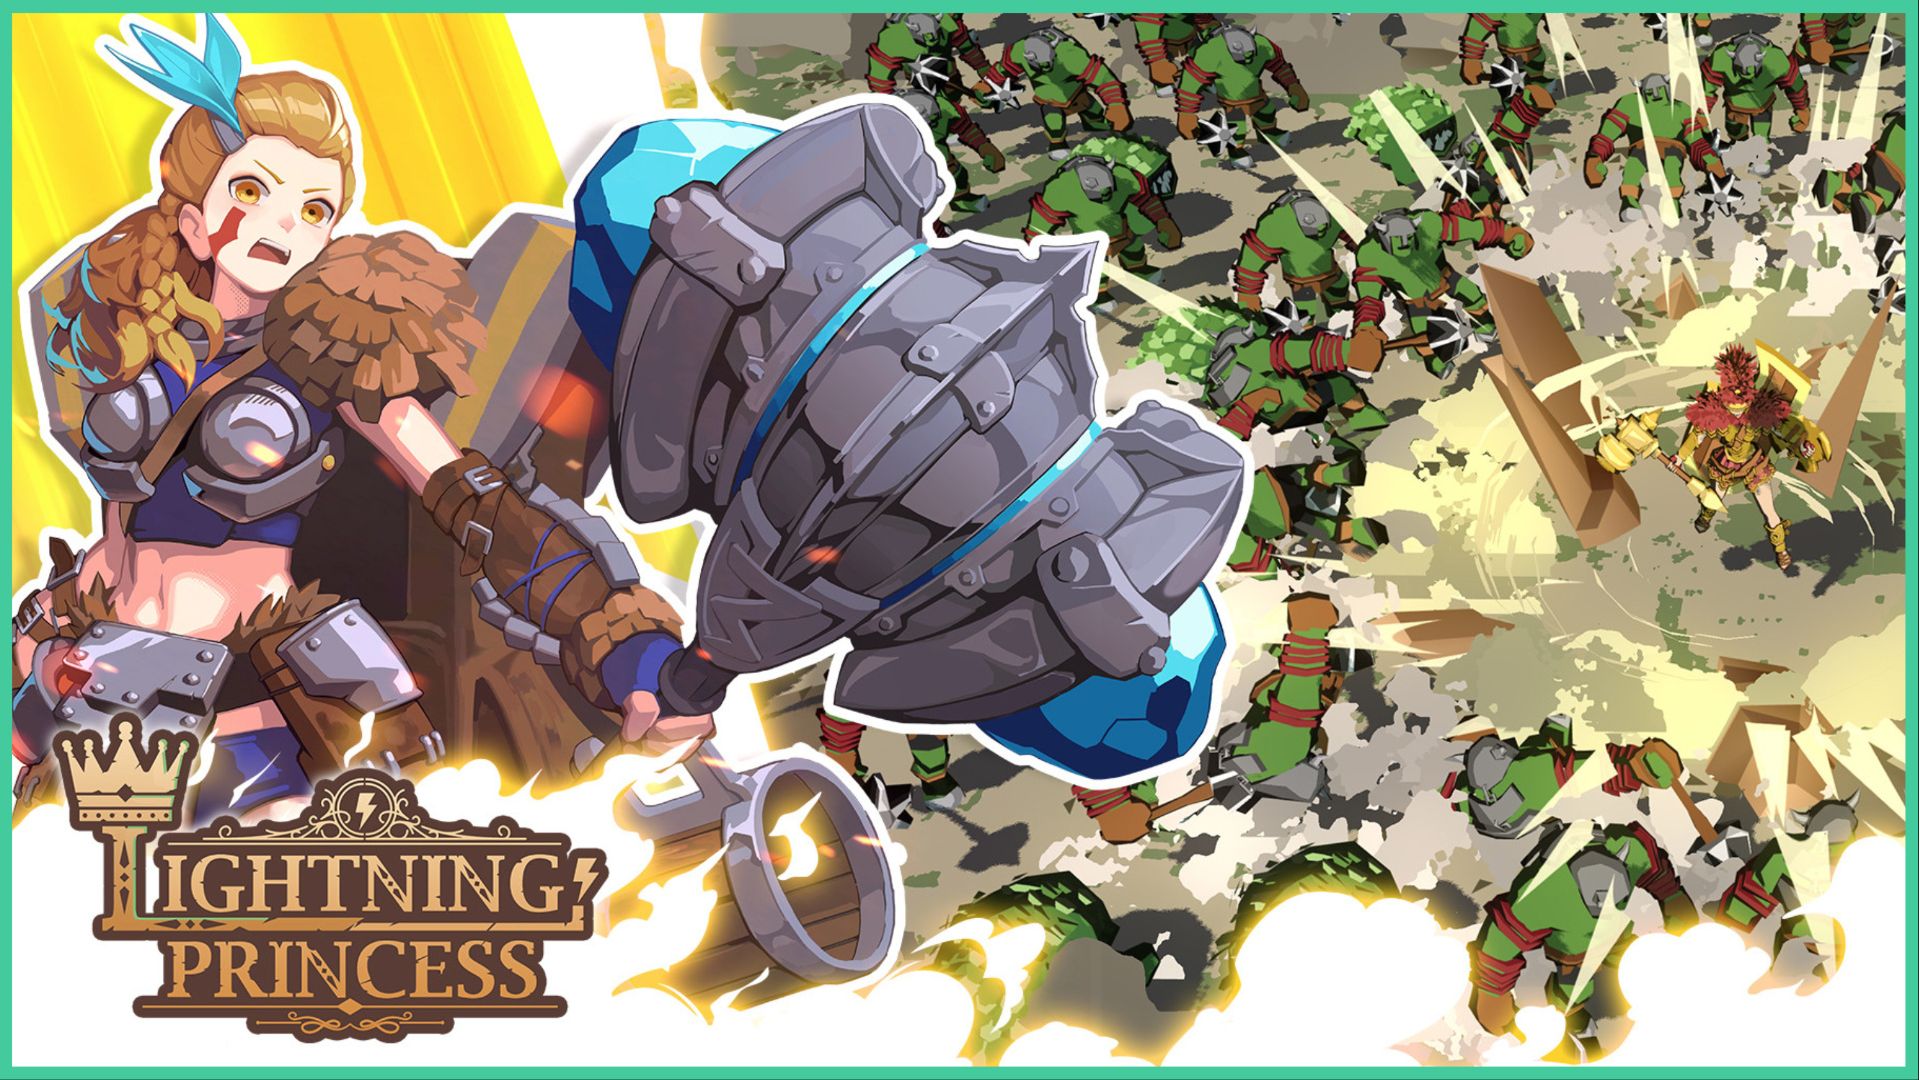 feature image for our lightning princess codes guide, the image features promo art for the game of the lightning princess as she wields a large hammer while yelling and wearing armor, there is also a screenshot from a battle of the enemies surrounding the main character as she creates a large explosion on the ground sending some enemies backwards, the game's logo is also in the left corner with a crown above the L